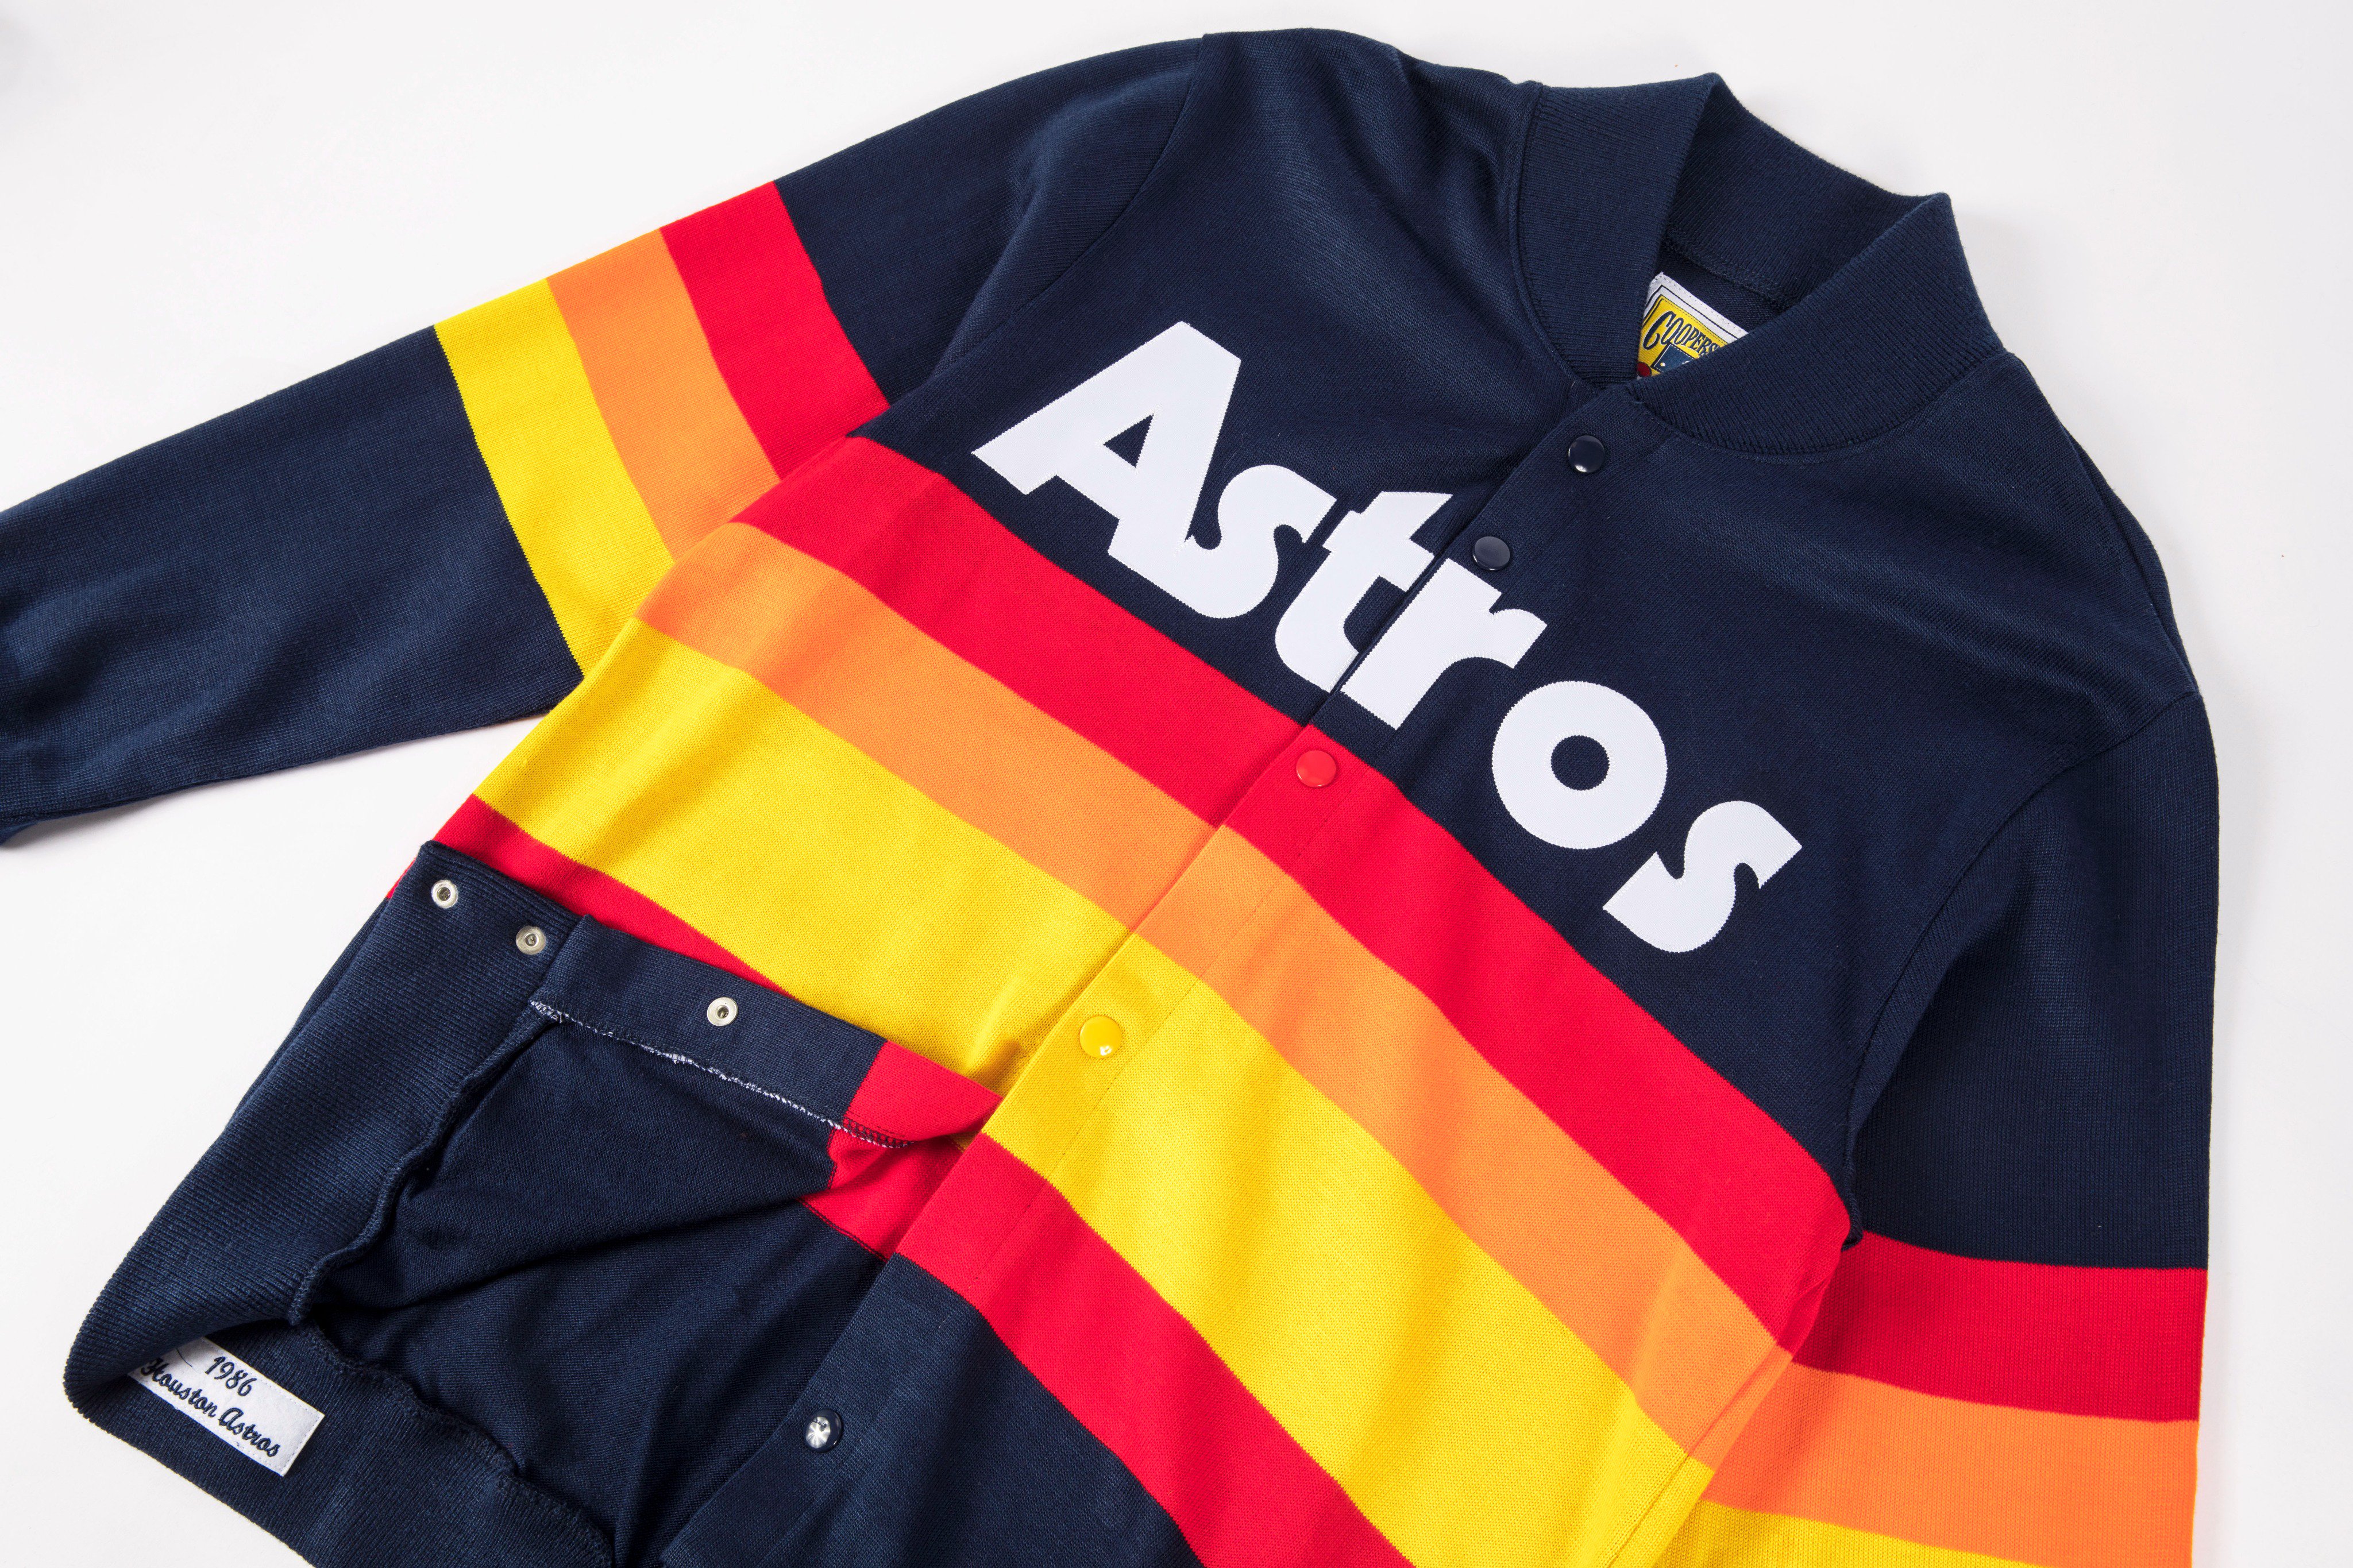 Mitchell & Ness on X: Anyone catch our '86 Astros sweater restock